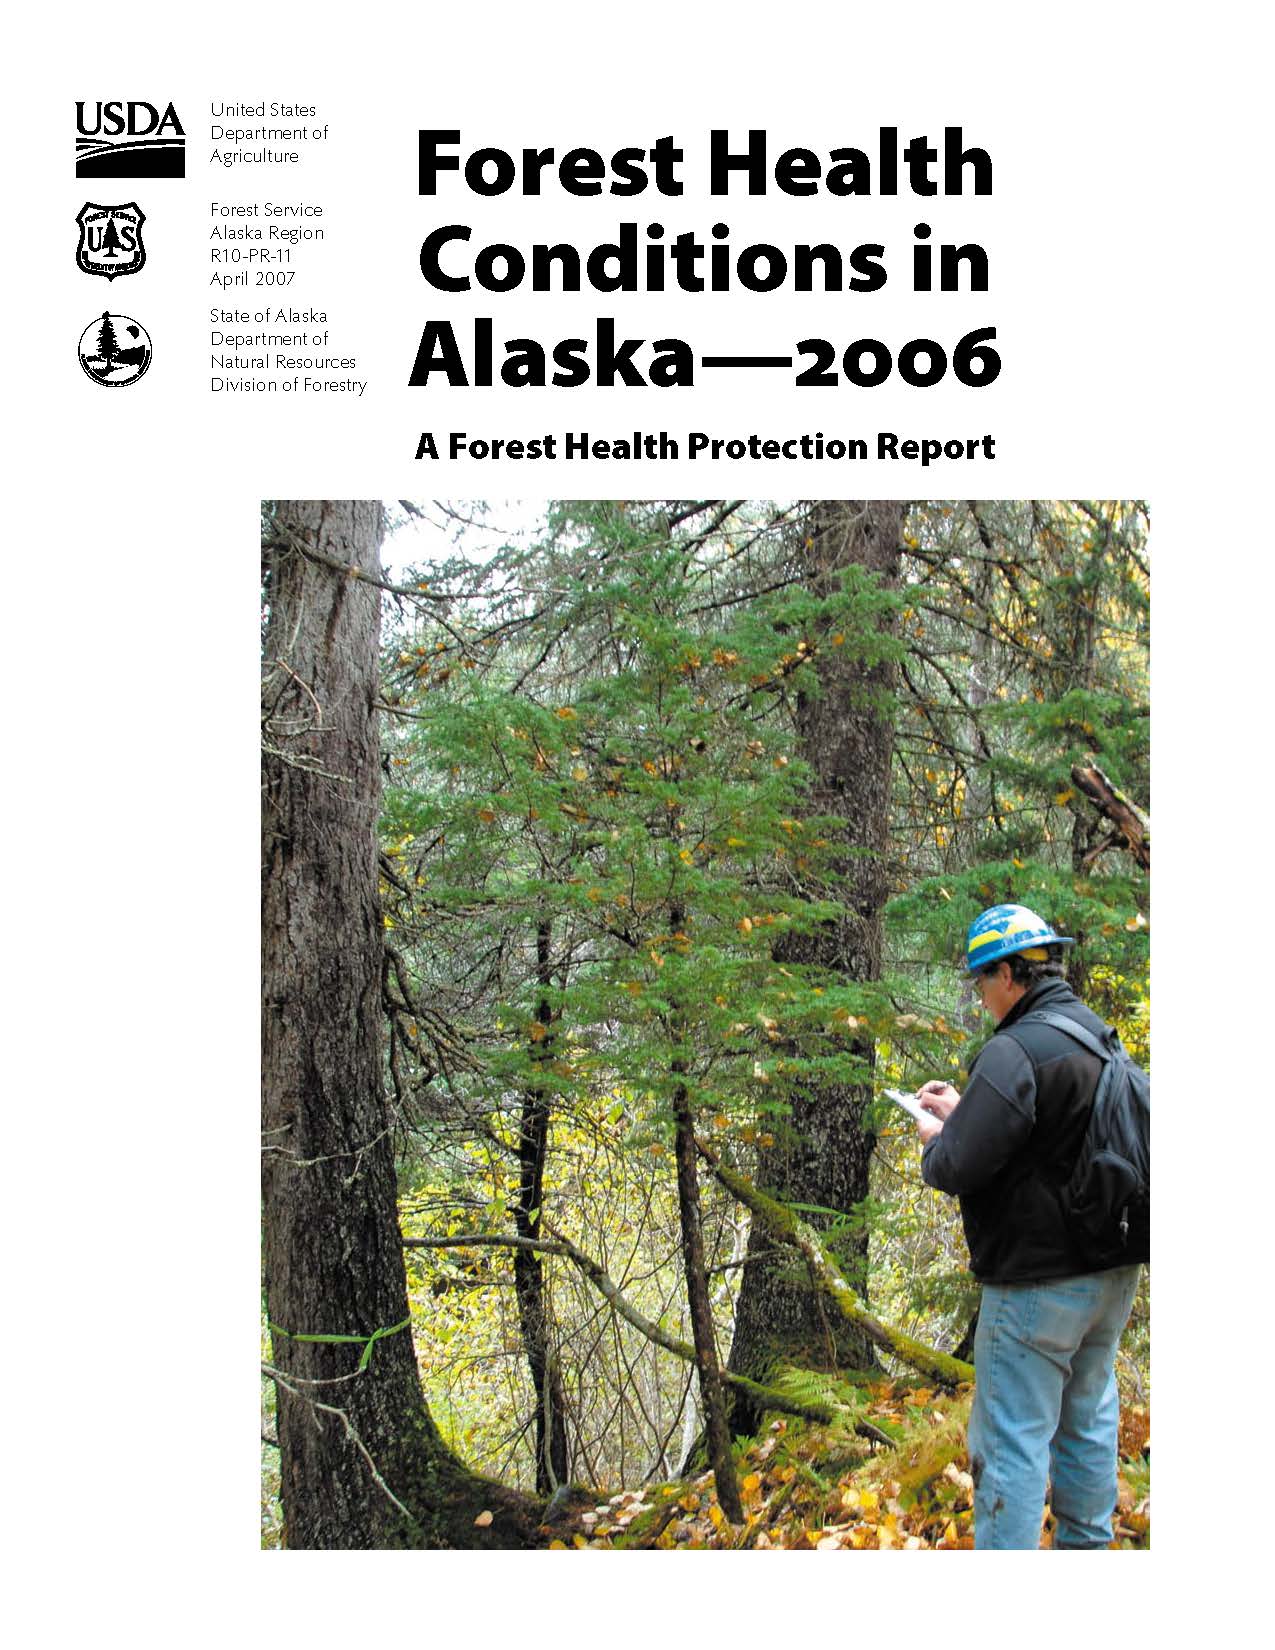 Cover of the 2006 Forest Health Conditions in Alaska report.